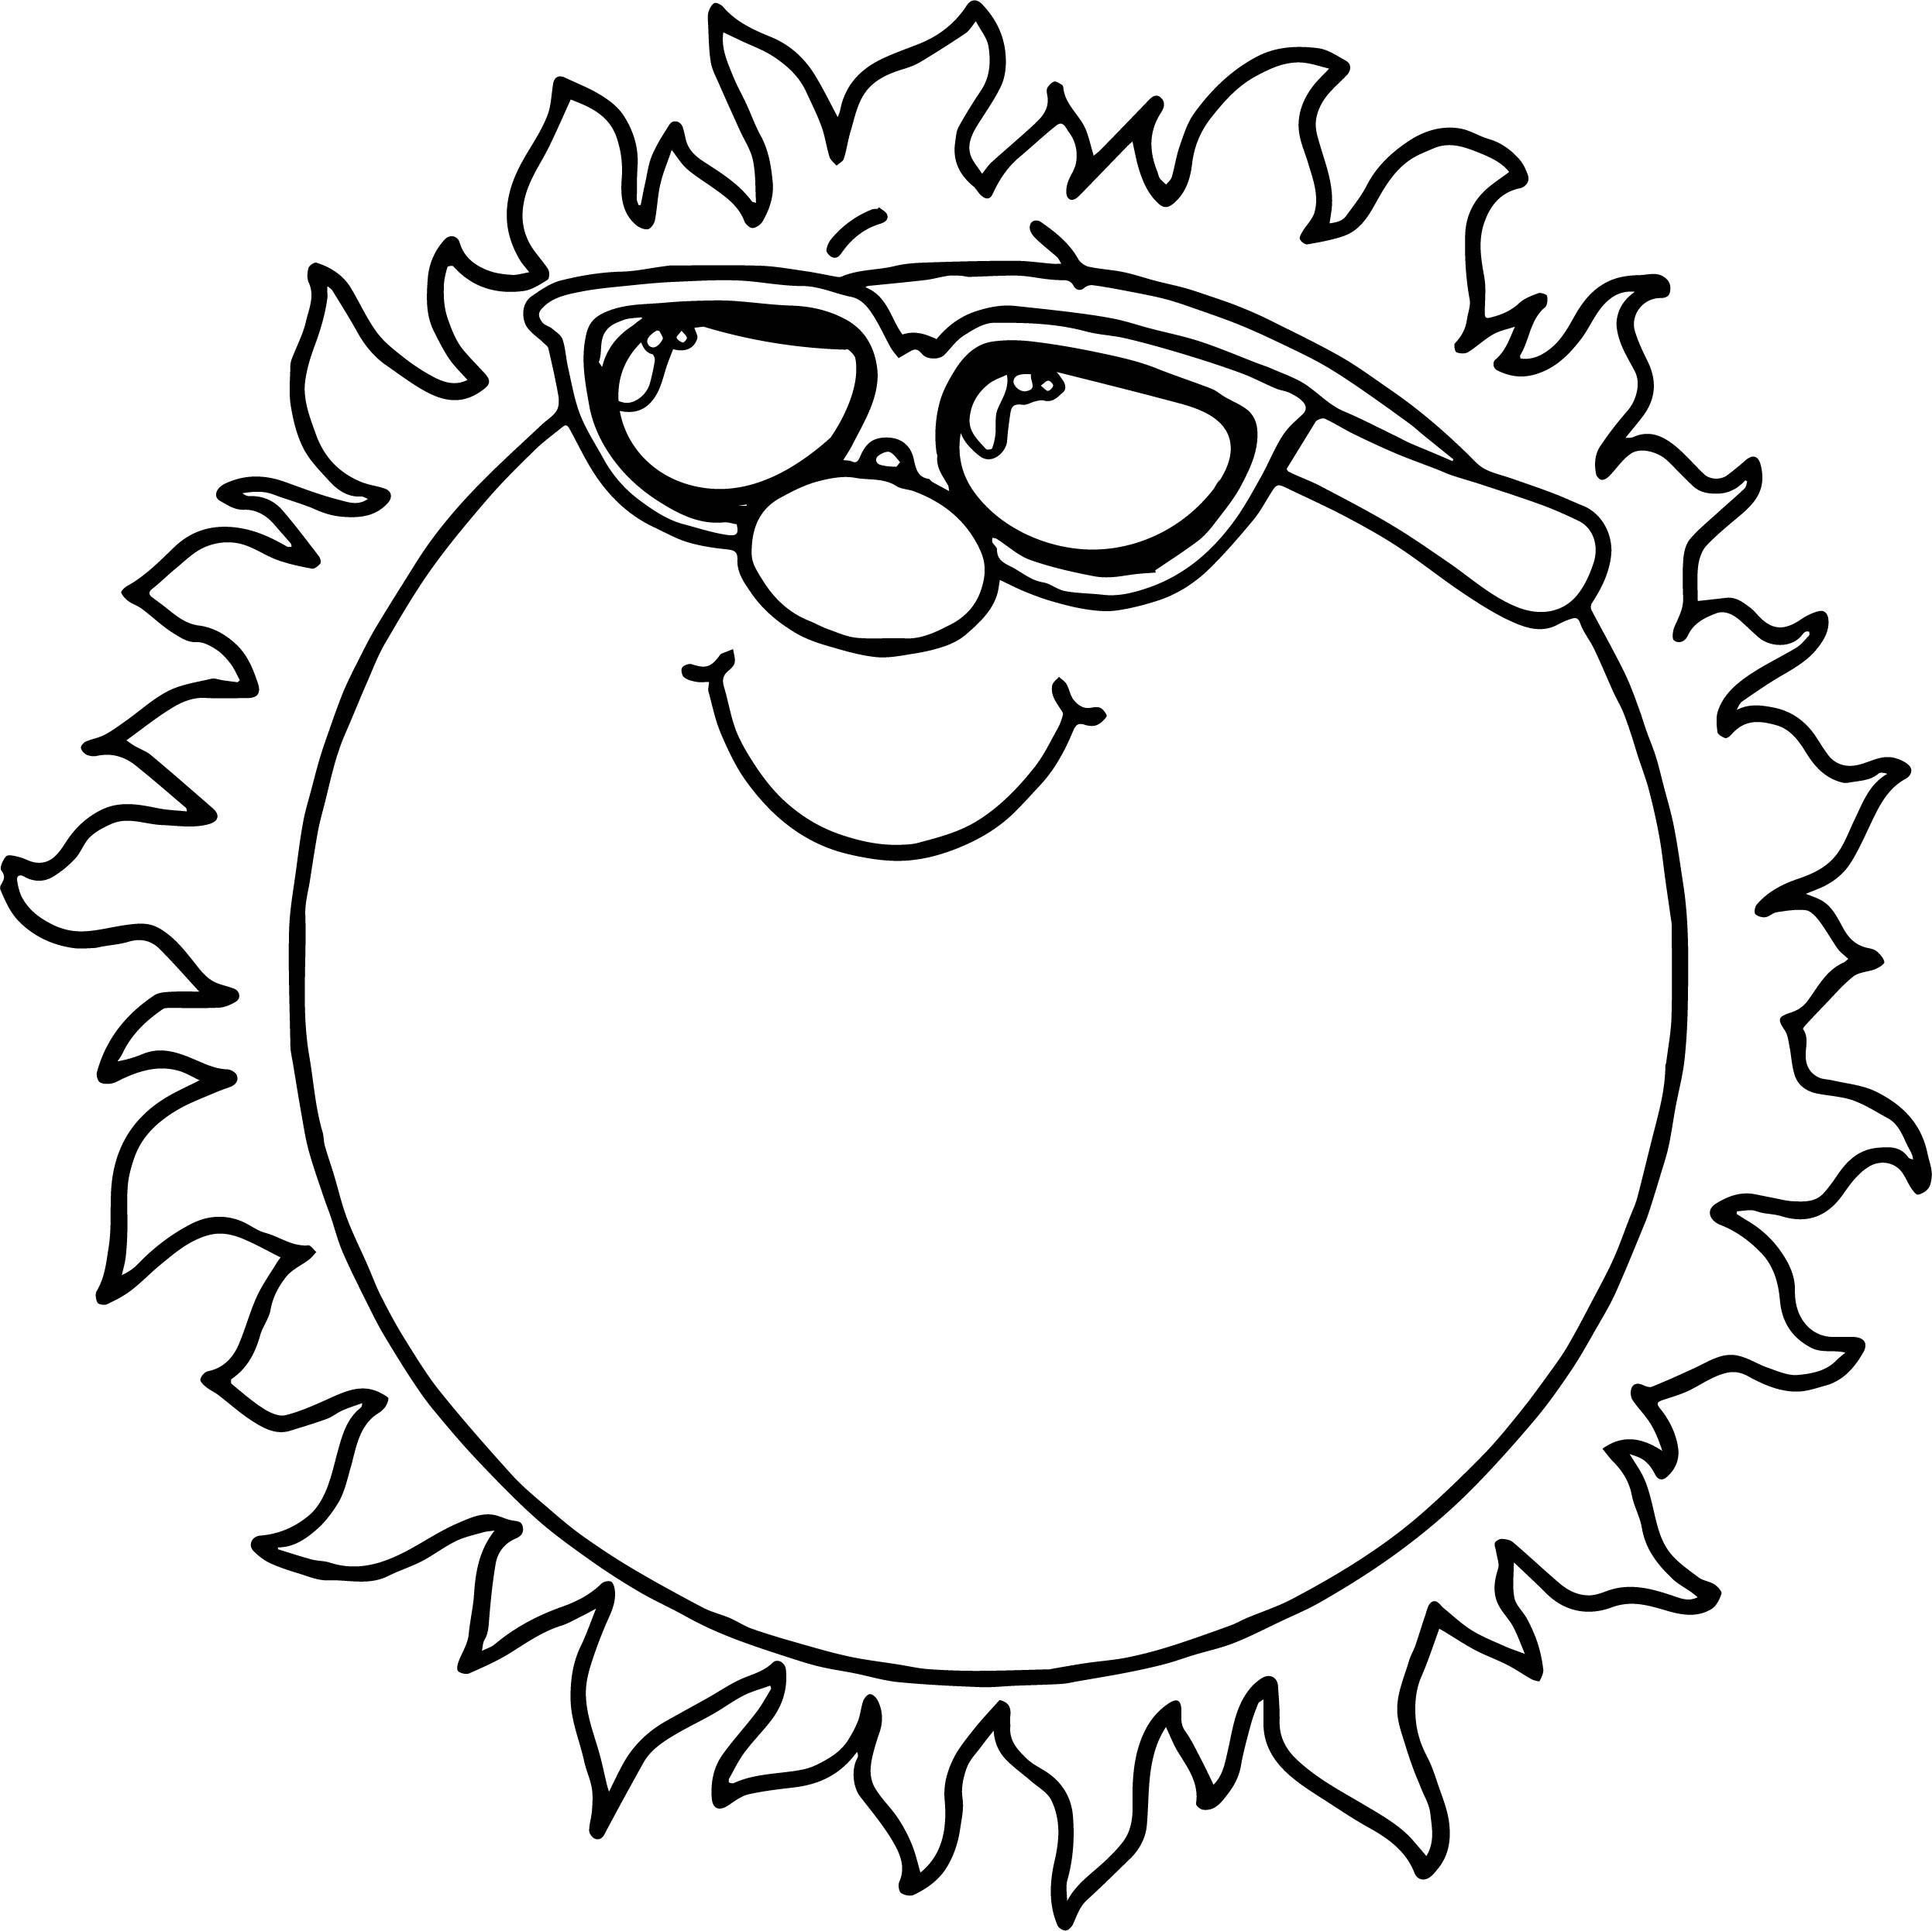 Solar Eclipse Coloring Page Coloring Pages